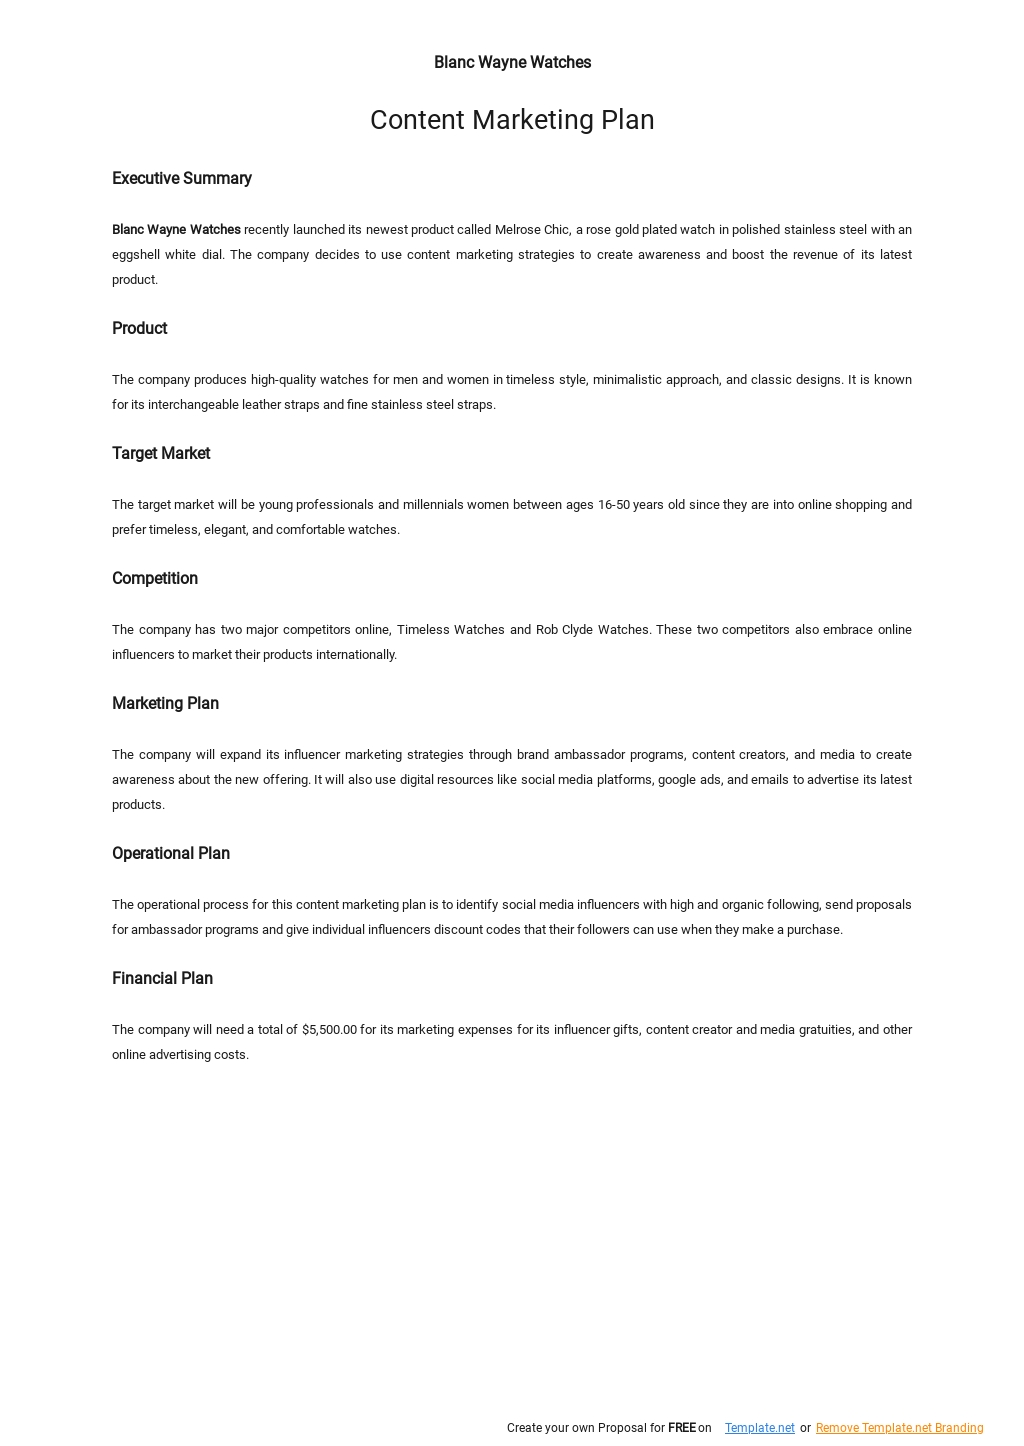 One Page Content Marketing Plan Template